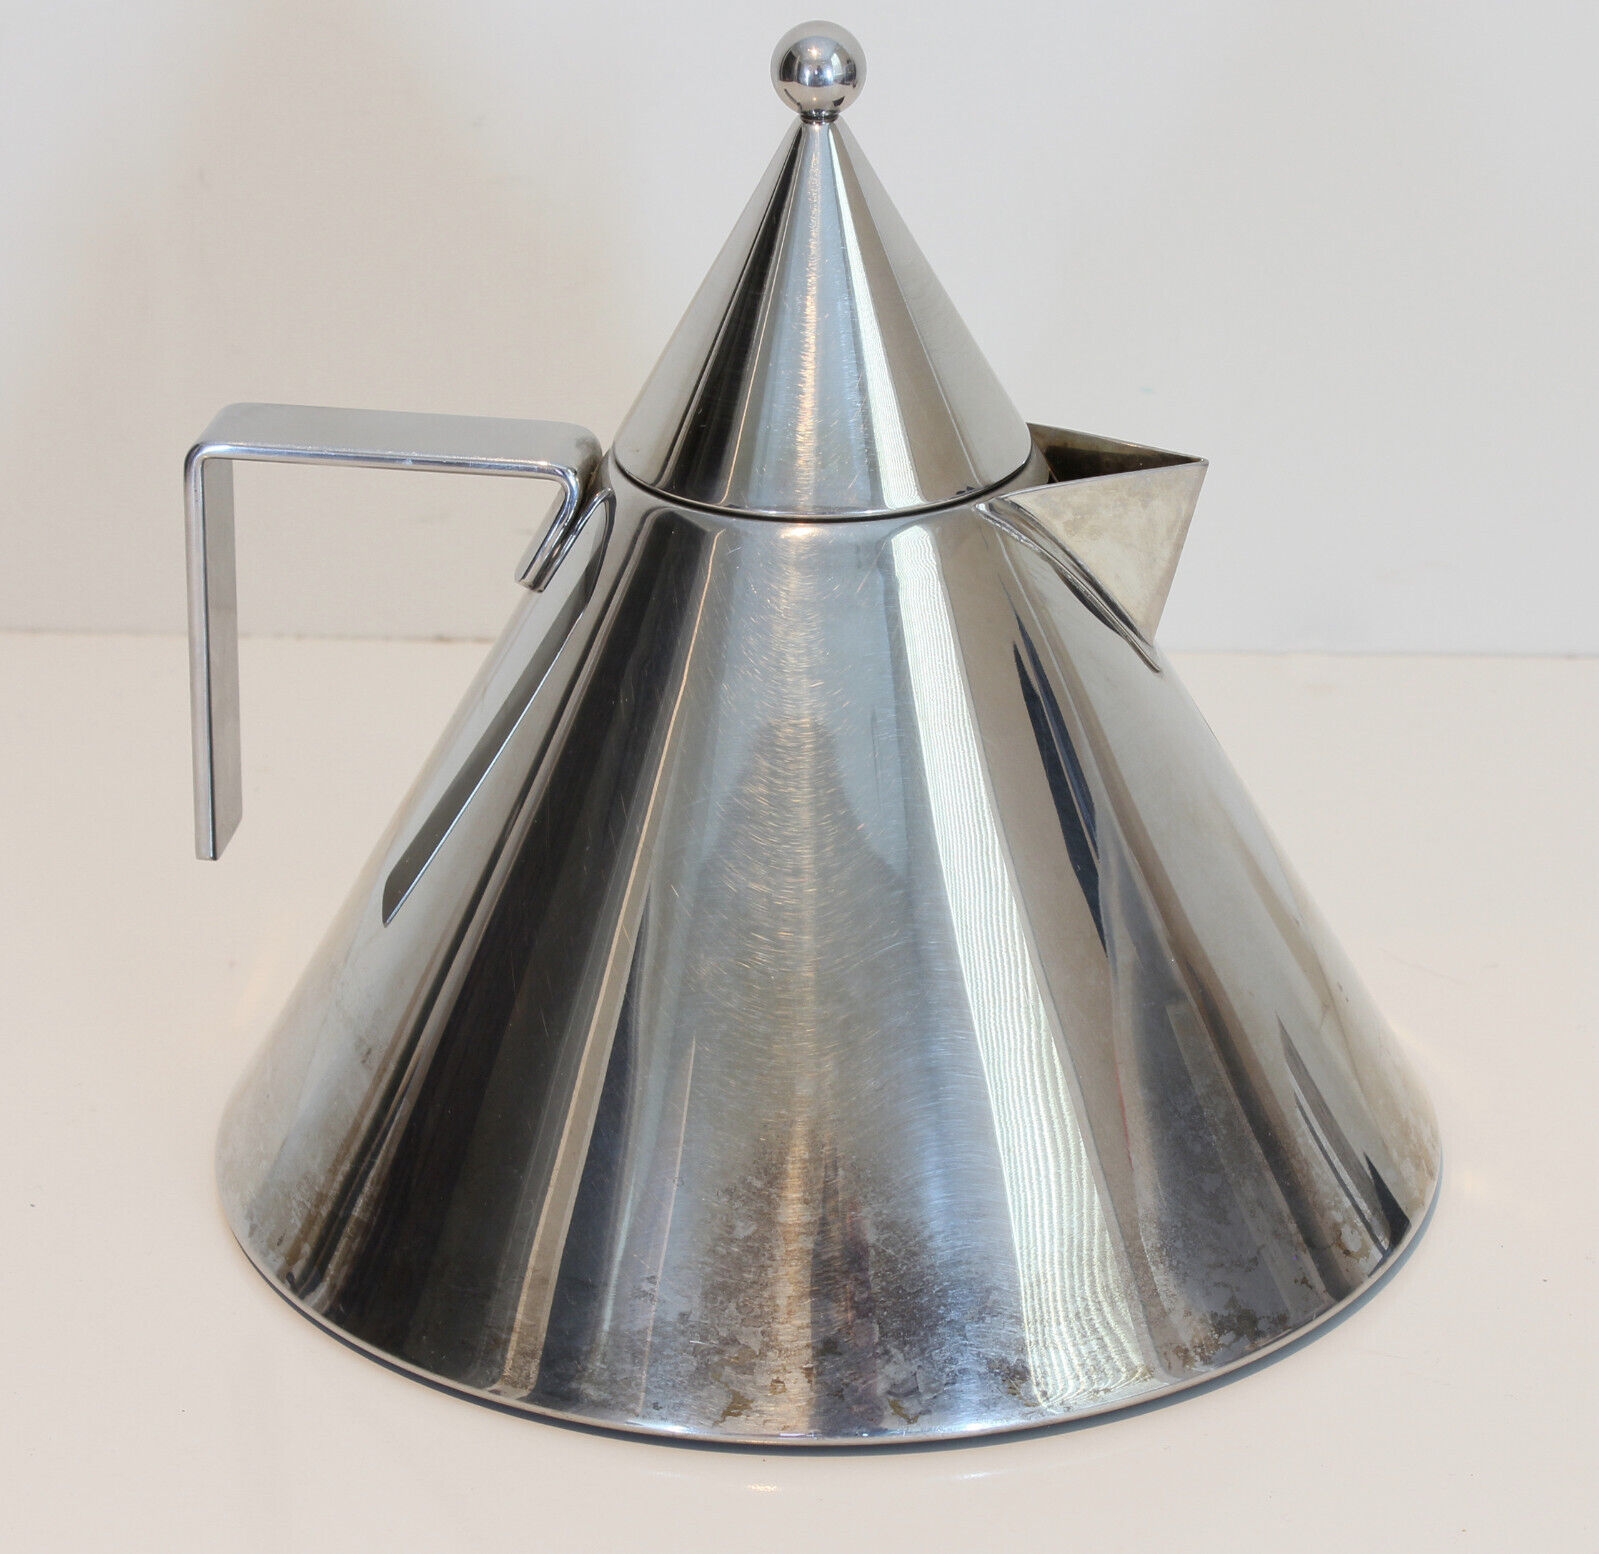 Alessi Il Conico 2 QT Stainless Steel Tea Kettle Aldo Rossi Vintage Made Italy